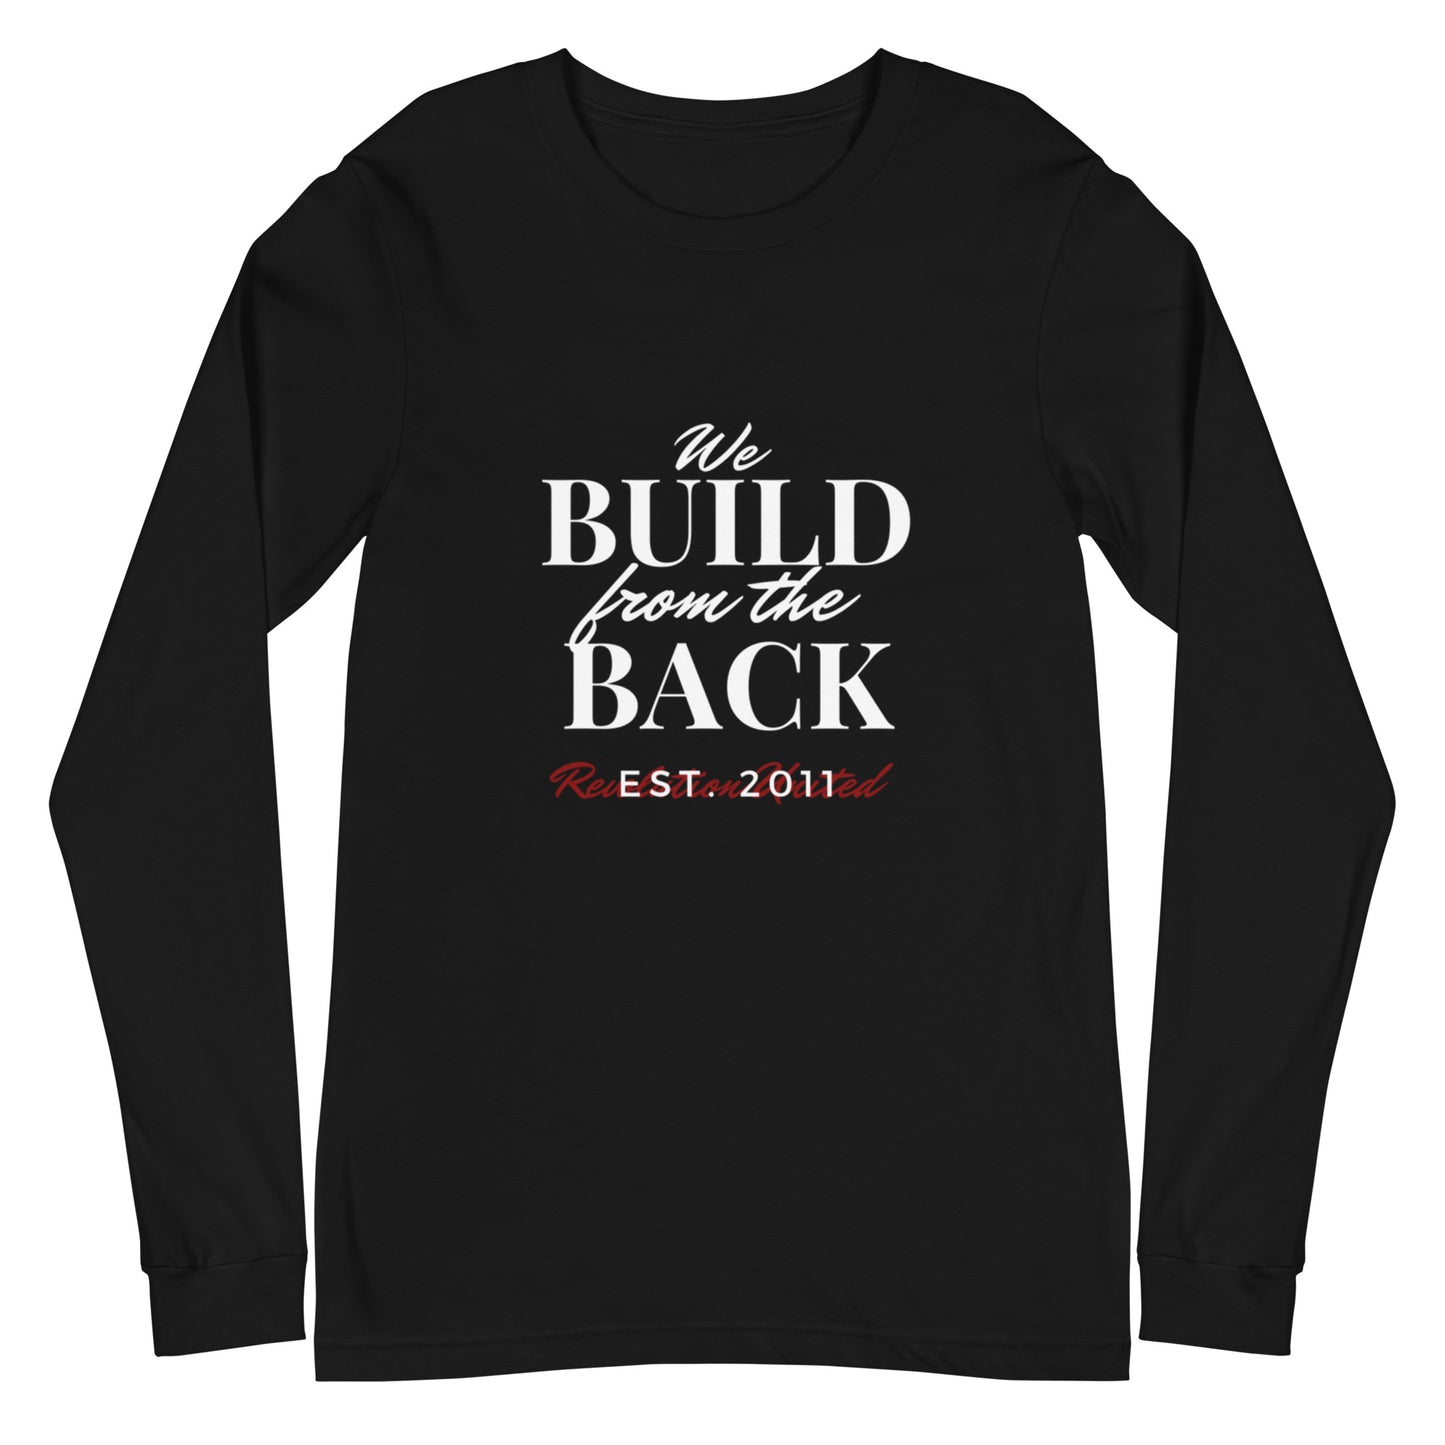 We Build from the Back Long Sleeve